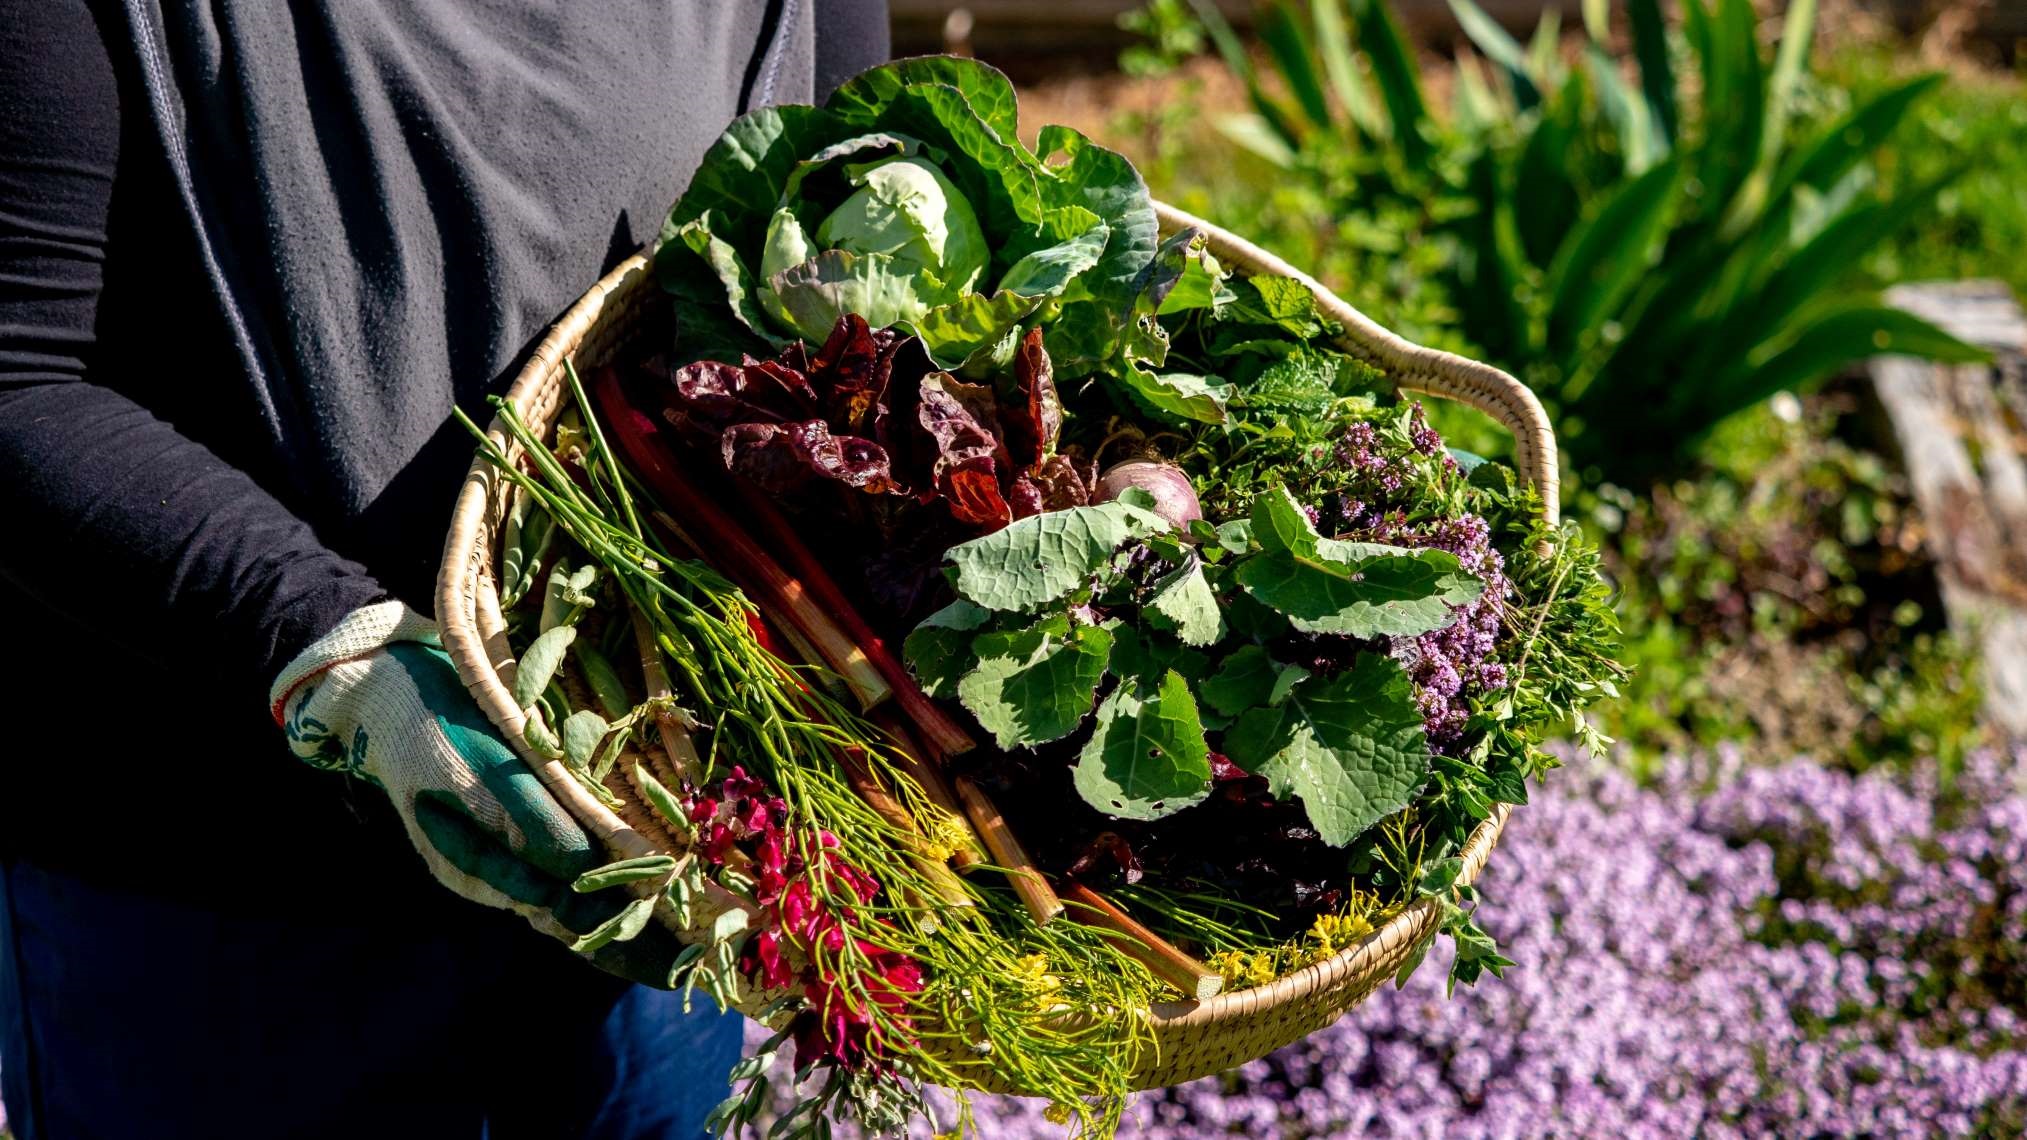 Photo shows gardener wearing gloves holding a straw basket full of freshly picked homegrown vegetables, salad greens and herbs.